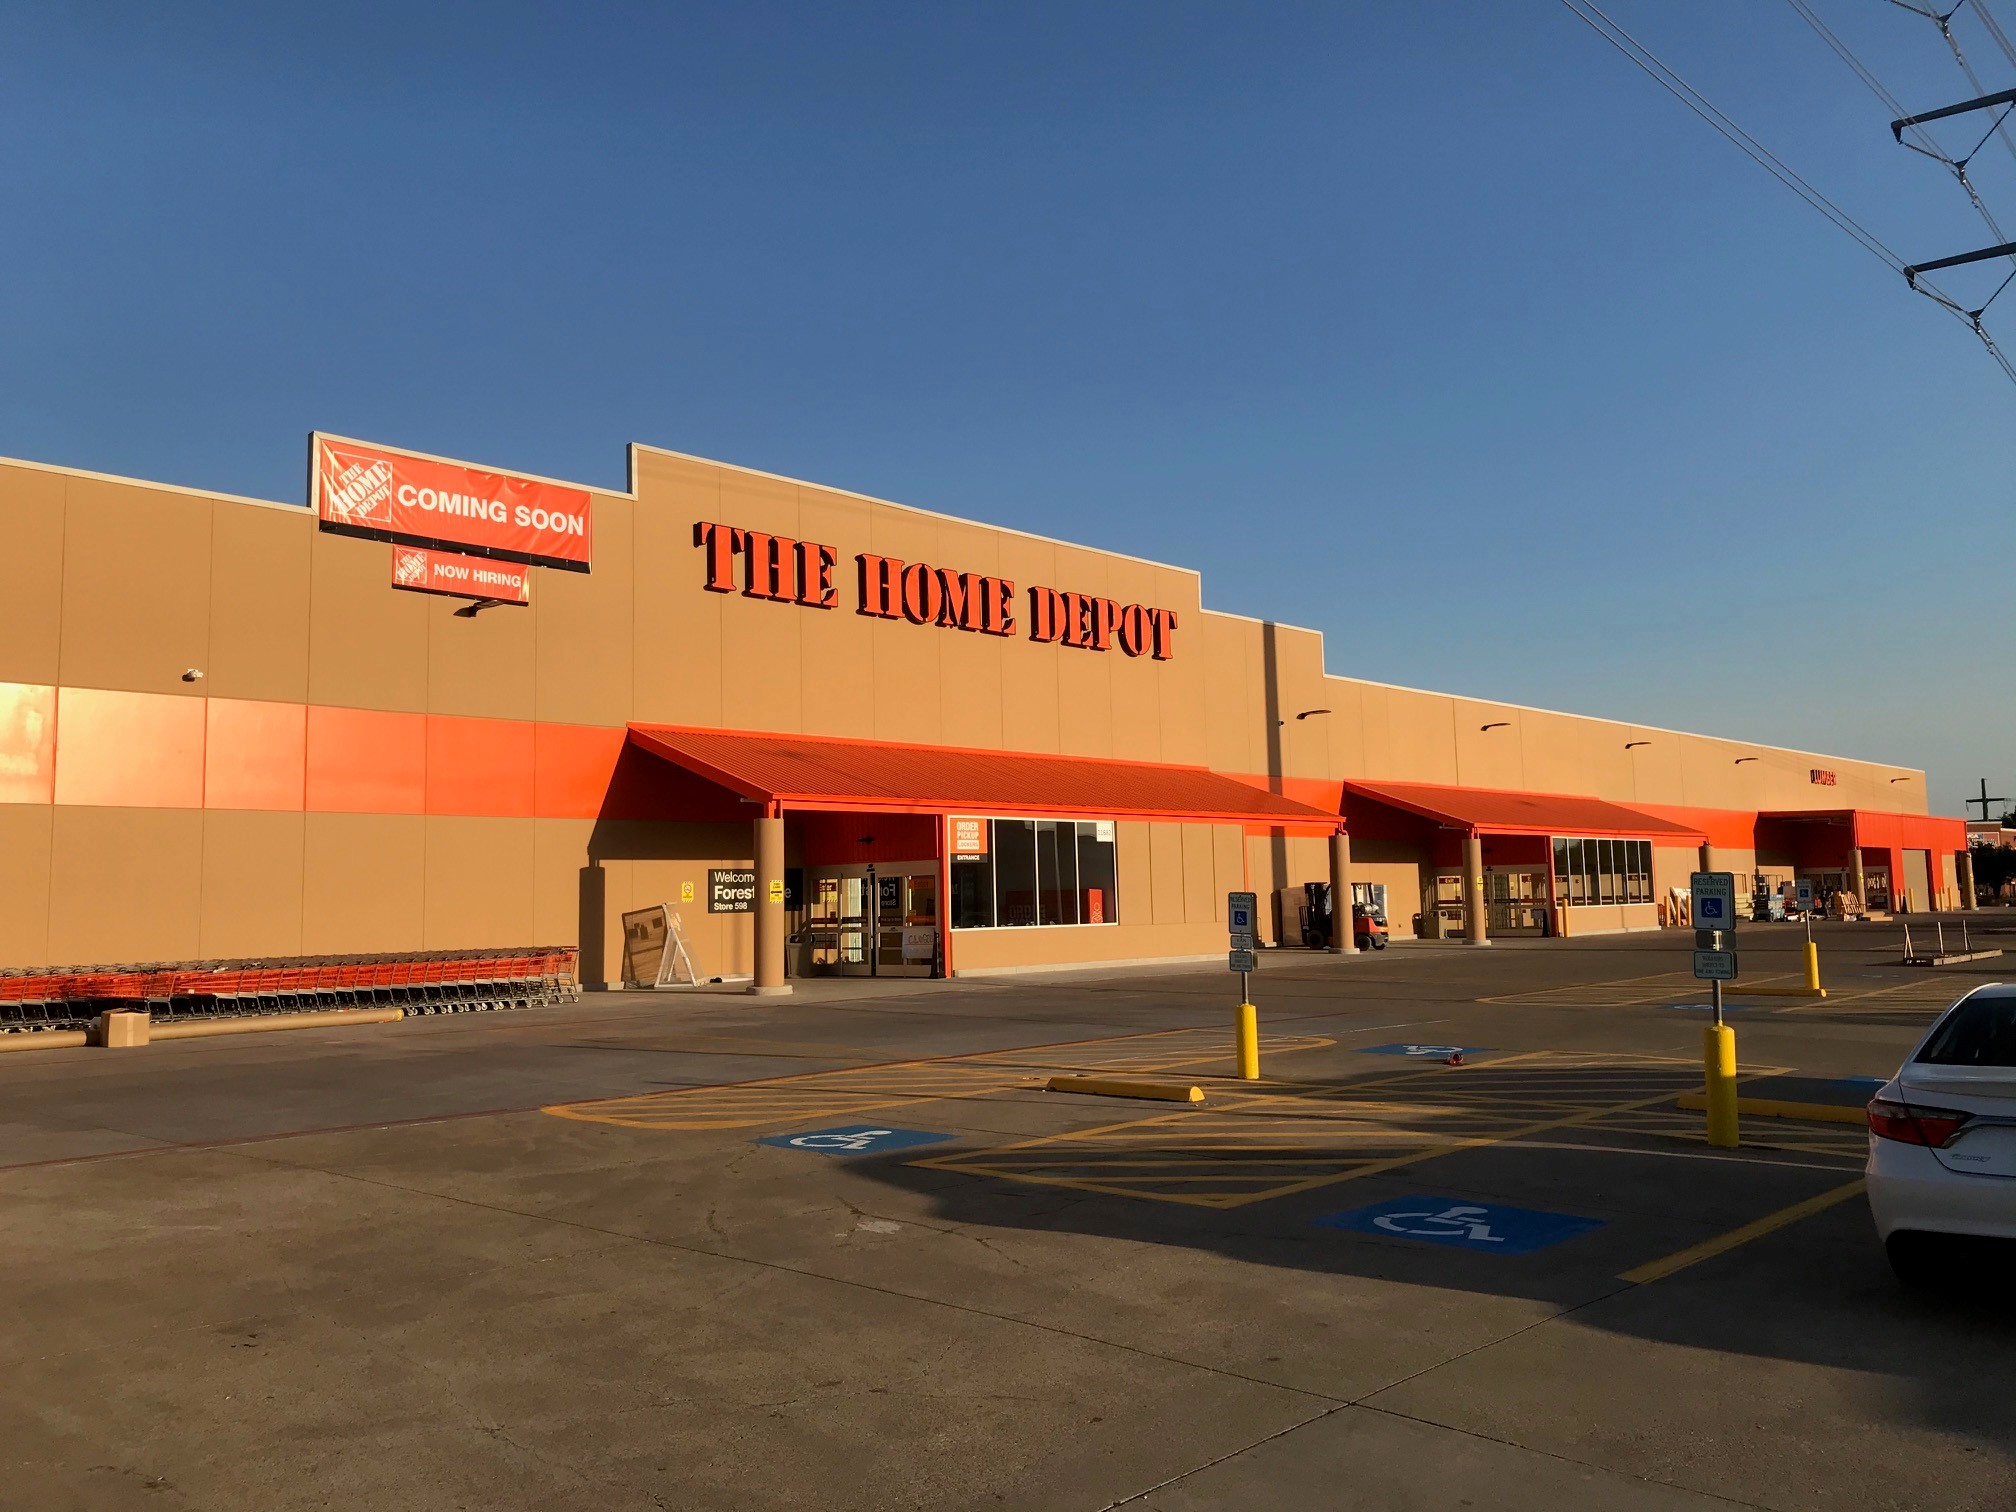 Home Depot Is Adding 1 000 Jobs At Huge Dallas Warehouse Dedicated To Online Purchases